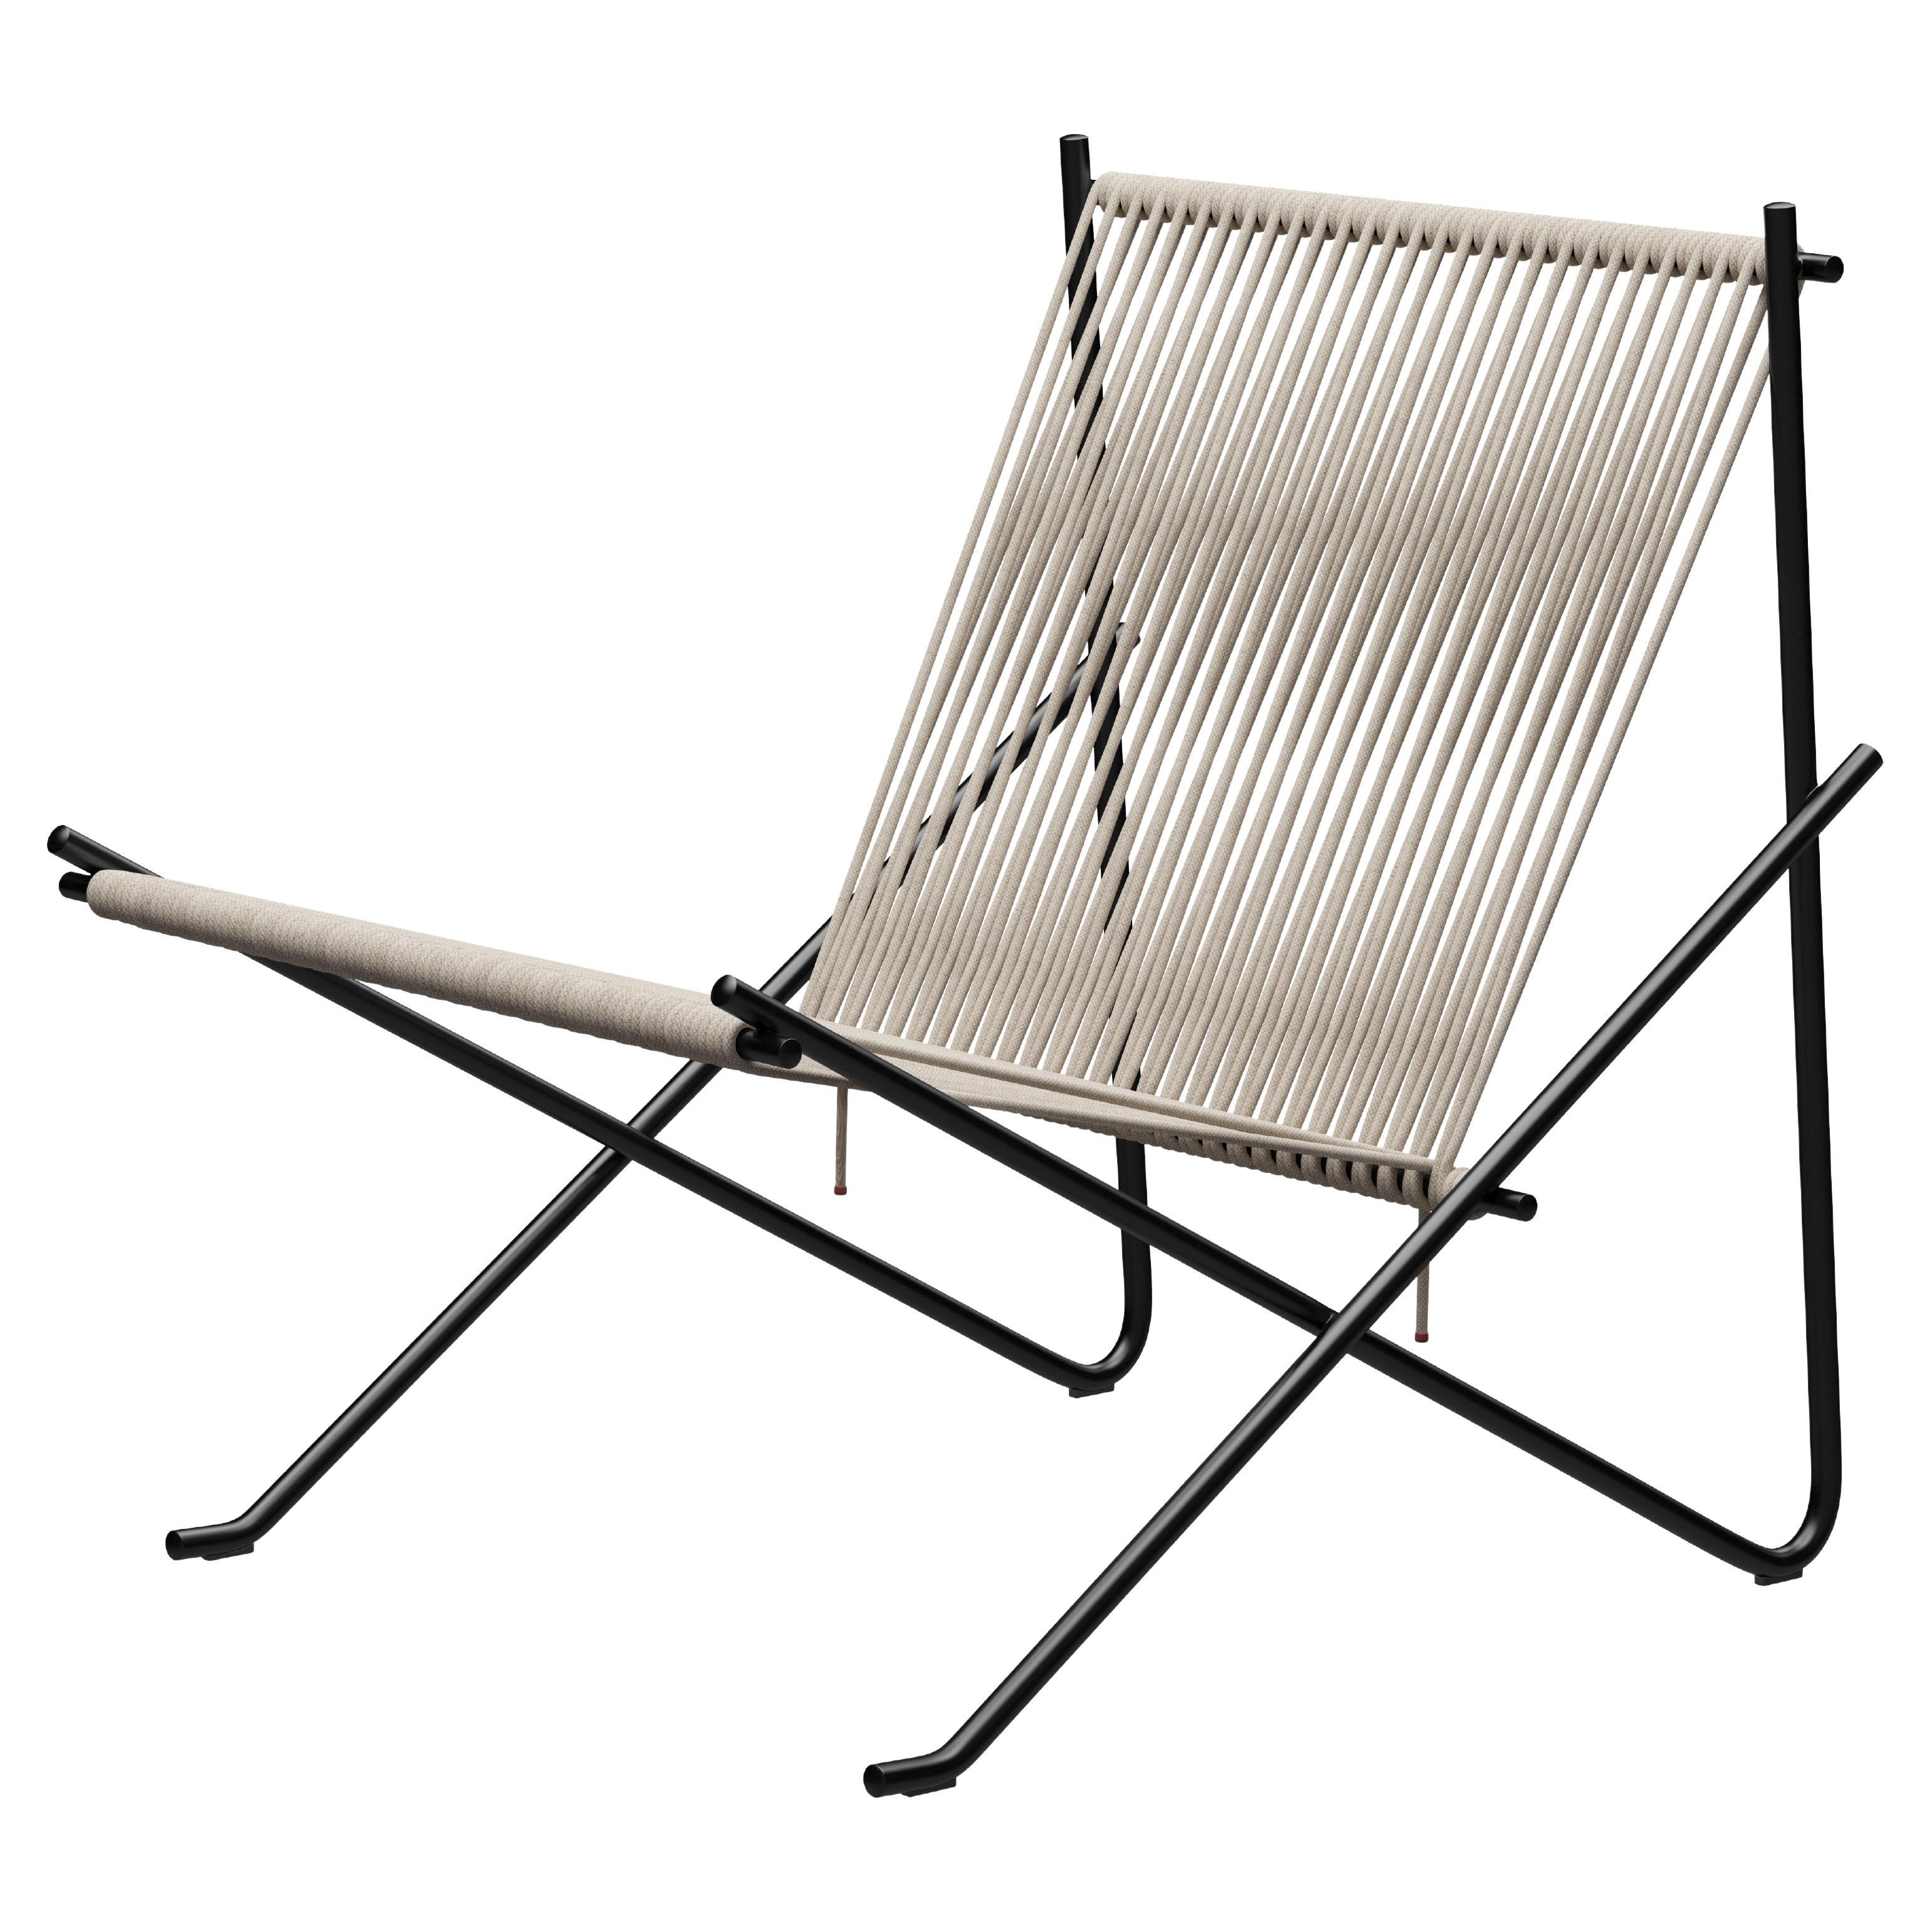 'PK4' Lounge Chair for Fritz Hansen in Natural Flag Halyard with Black Frame